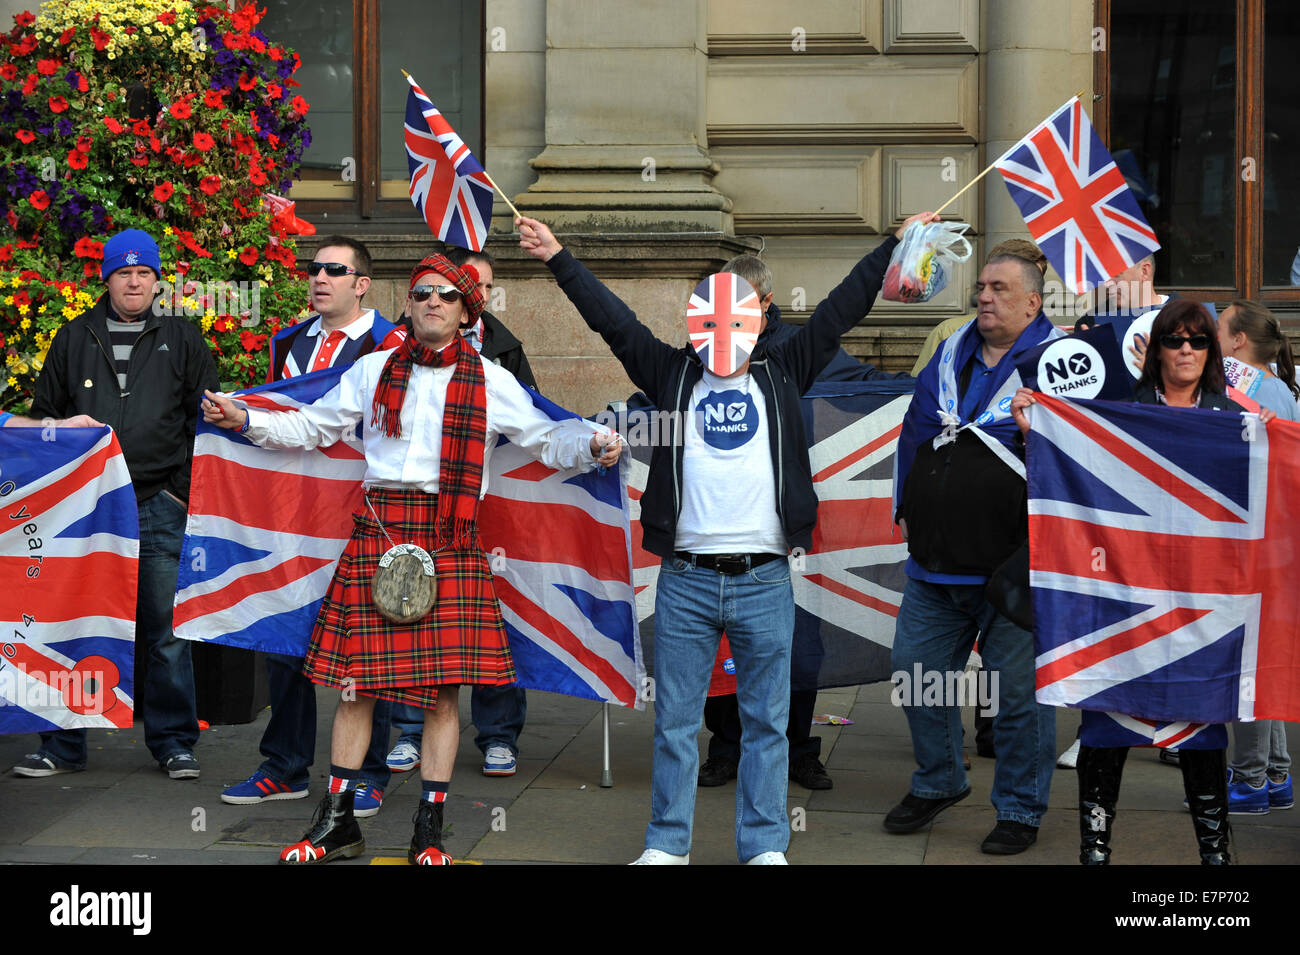 Protest by Unionists/Loyalists leading to stand off at pro-independence rally prior to Scottish independence referendum Stock Photo